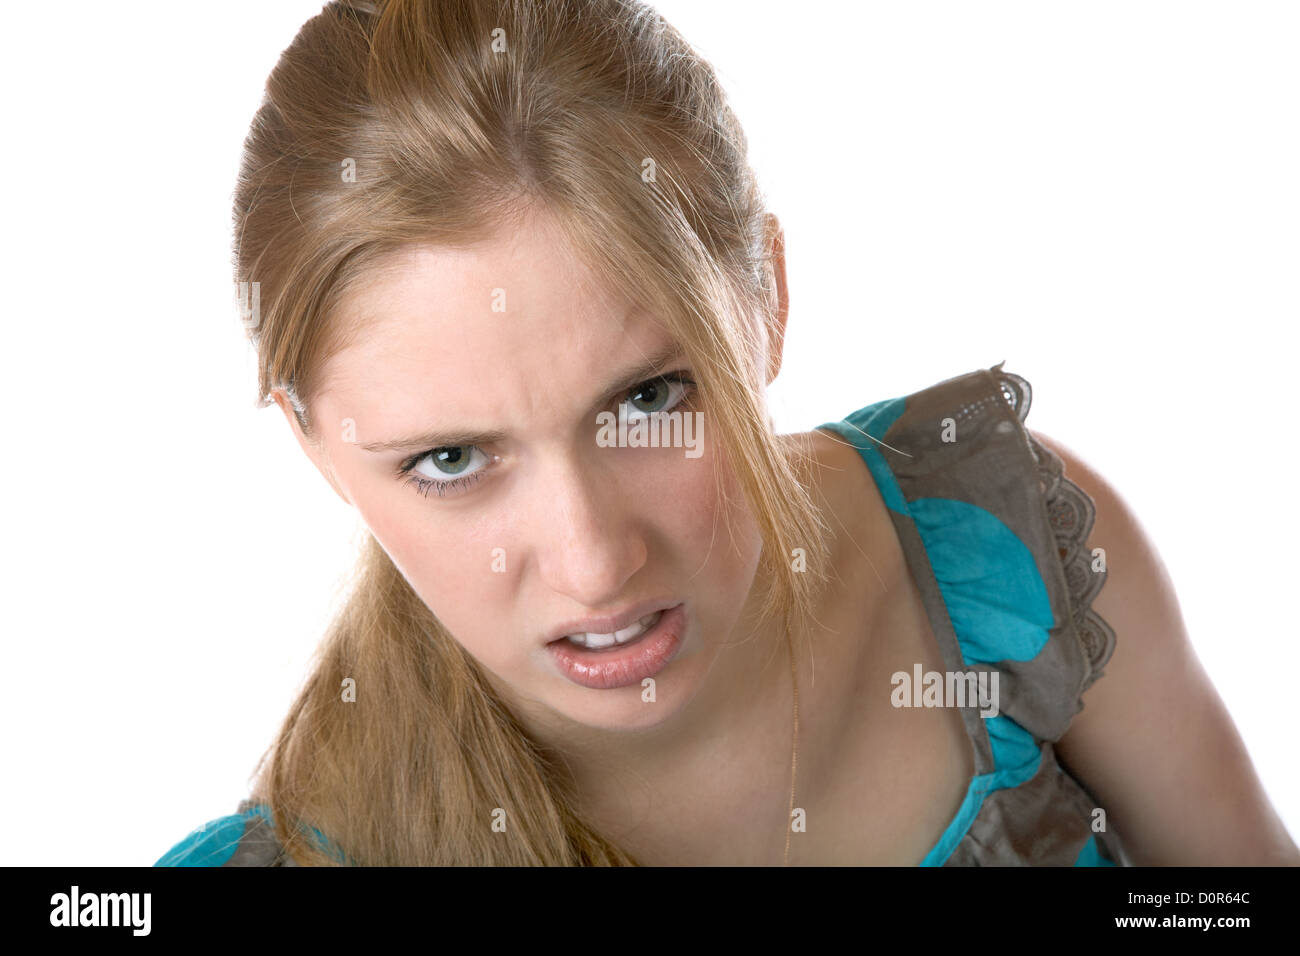 The girl shows discontent Stock Photo